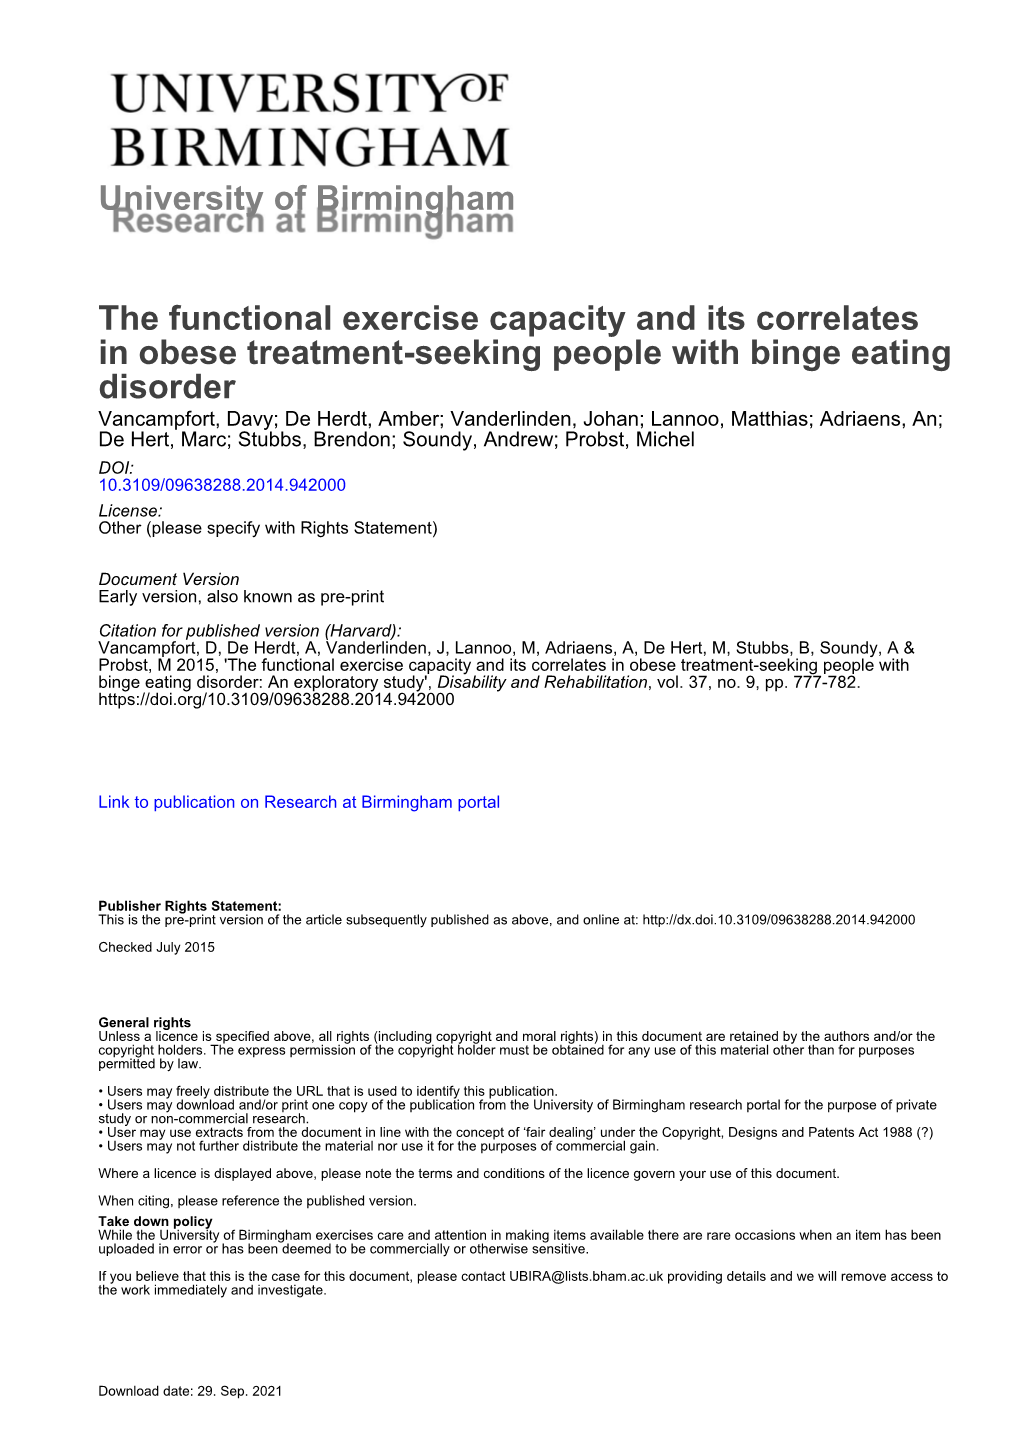 University of Birmingham the Functional Exercise Capacity and Its Correlates in Obese Treatment-Seeking People with Binge Eating